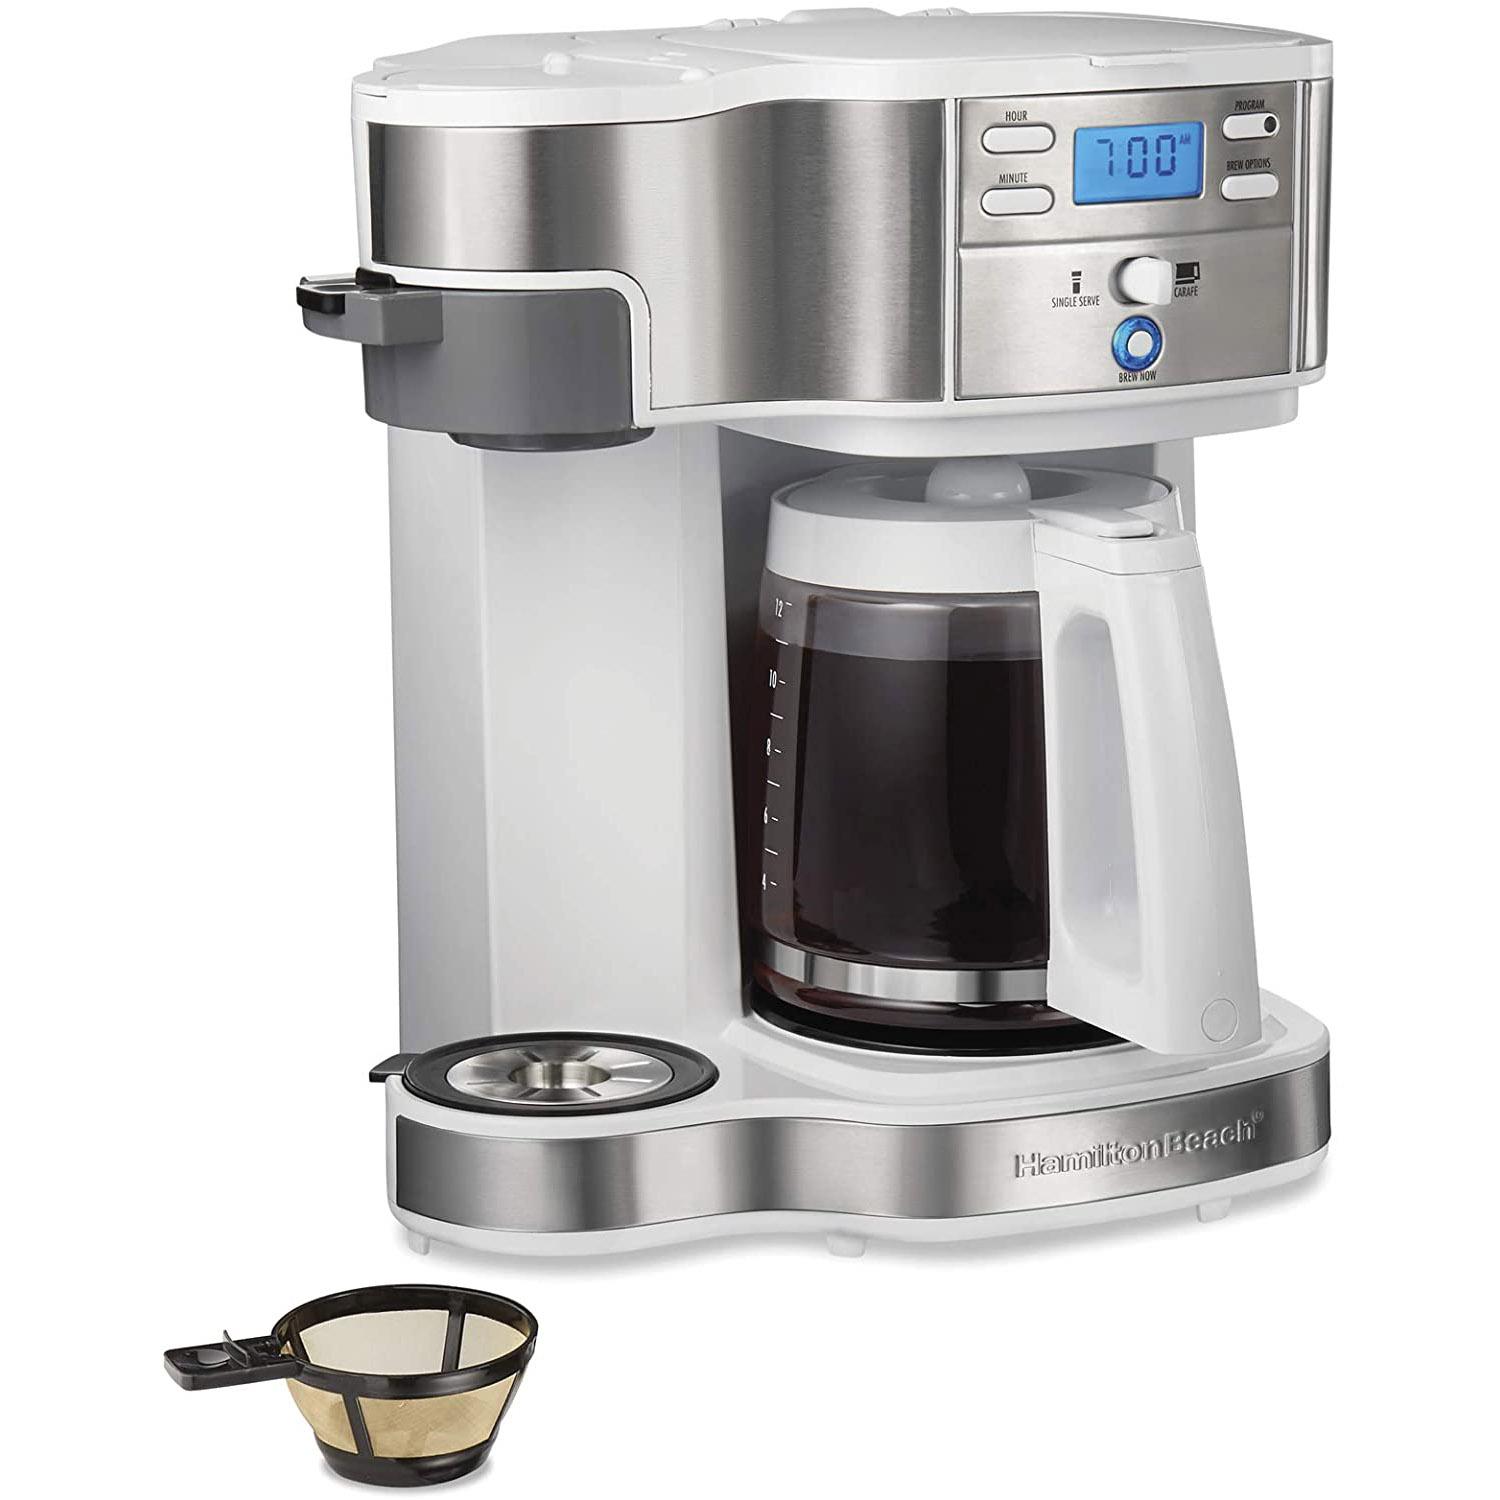 Hamilton Beach 2-Way Brewer Coffee Maker for $48.99 Shipped